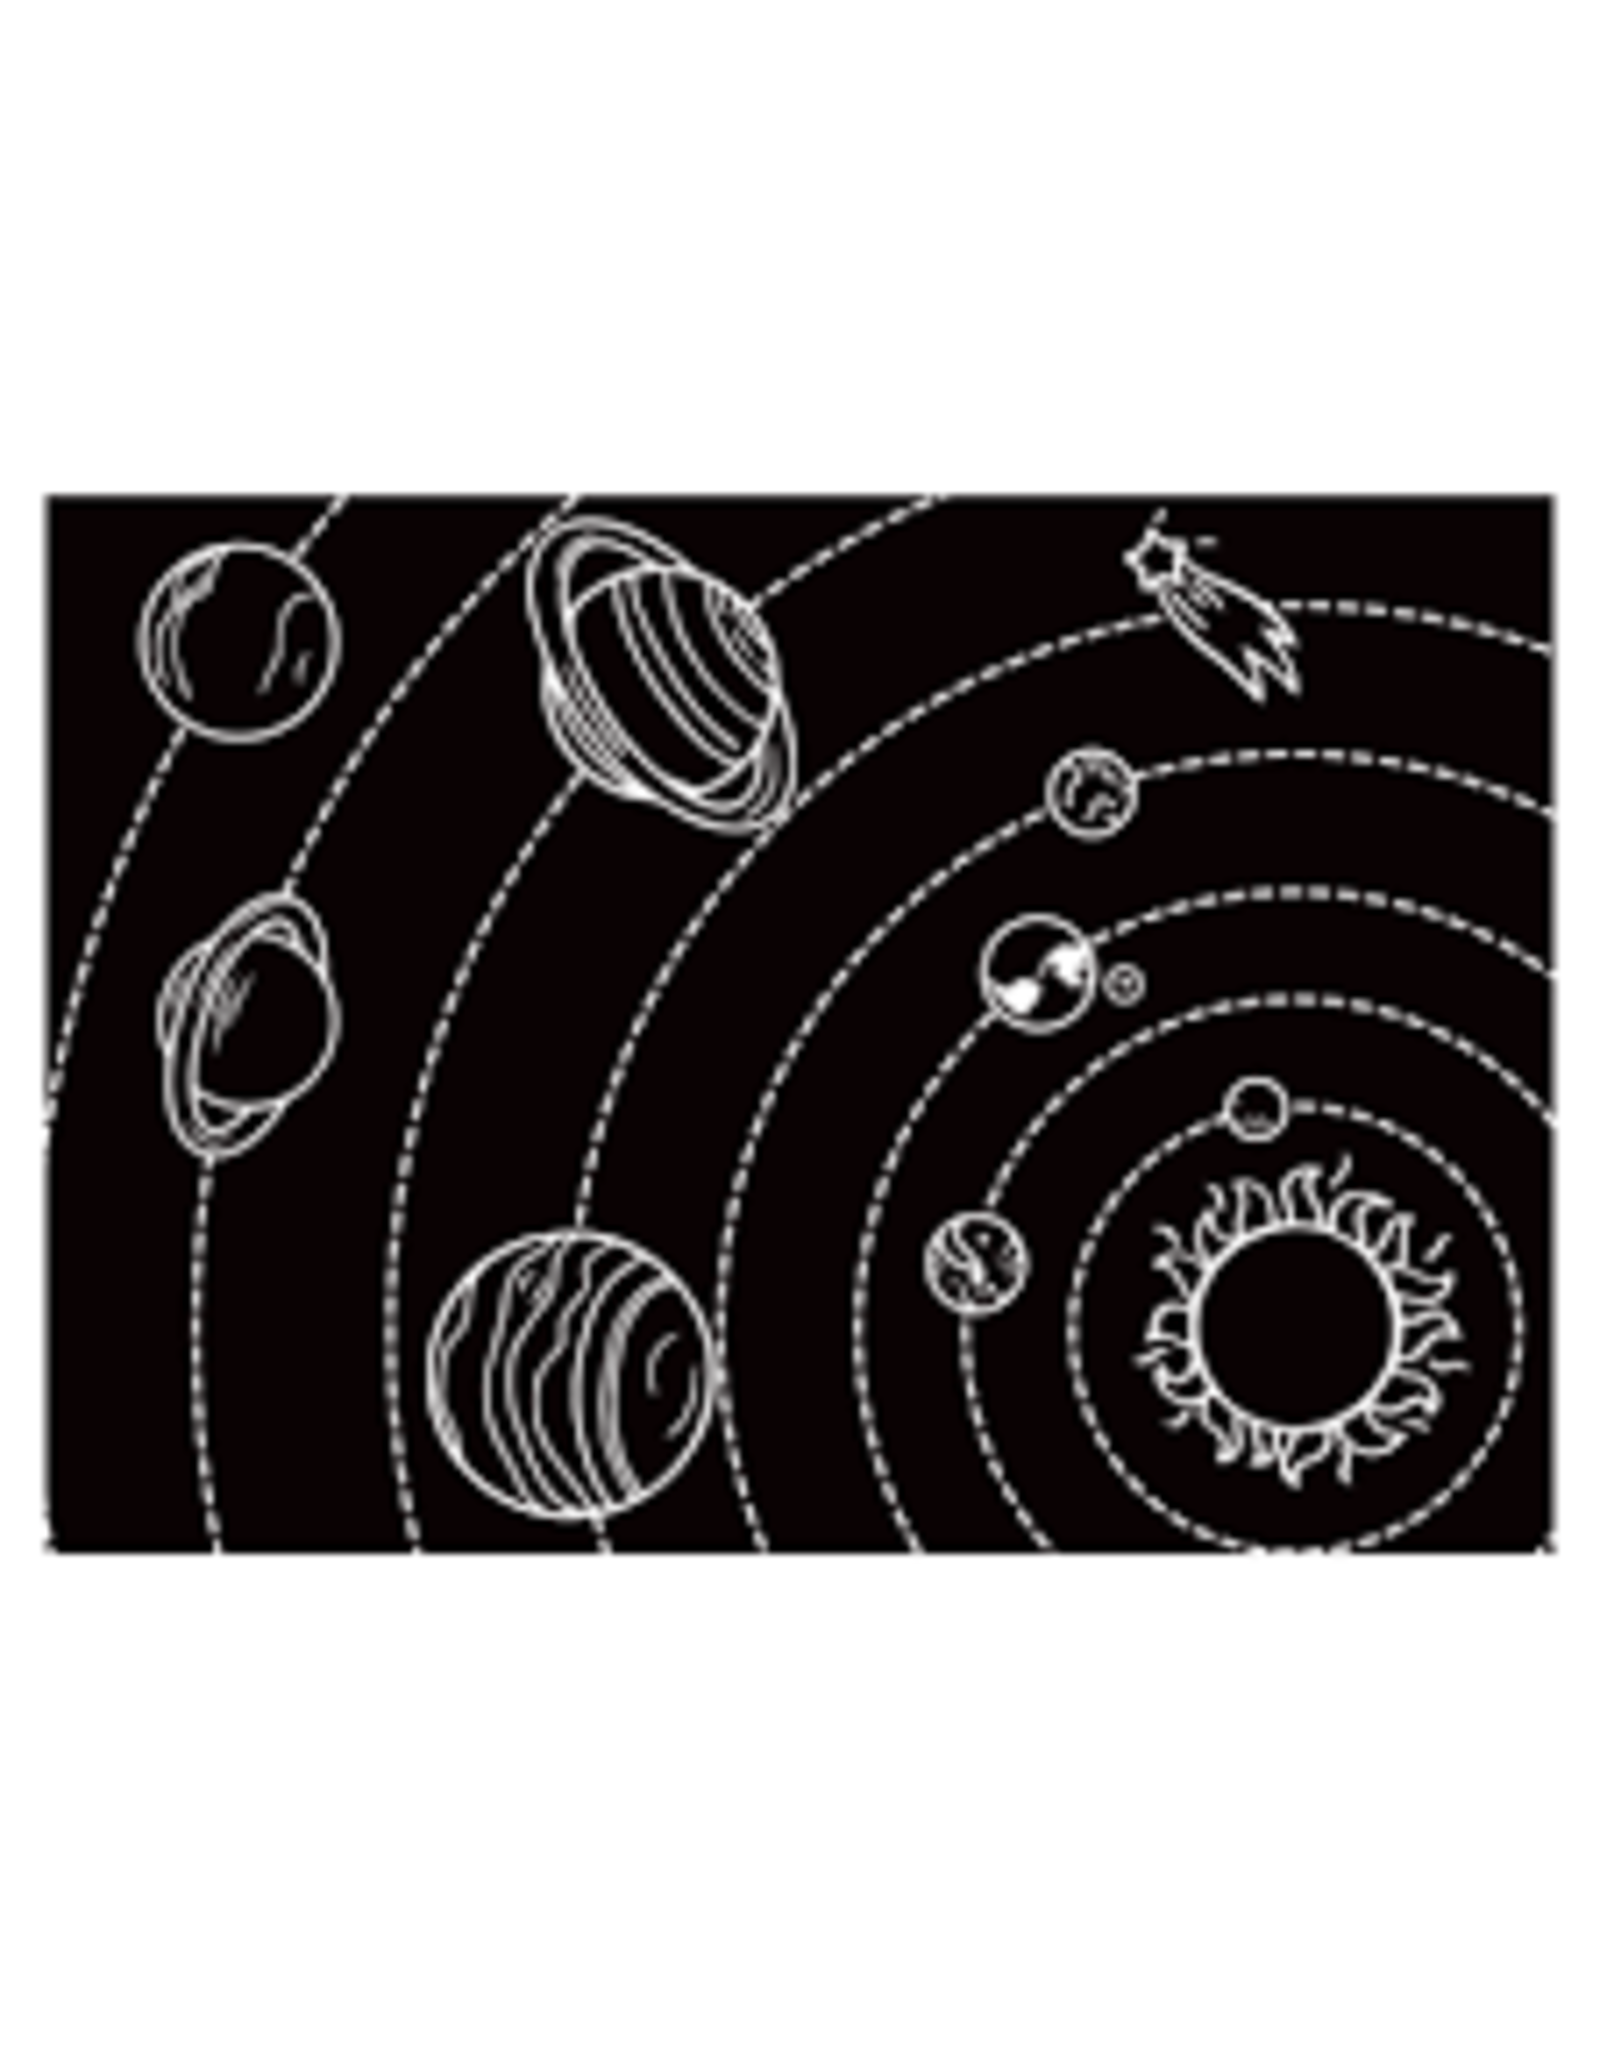 Chalkboard Placemat Solar System